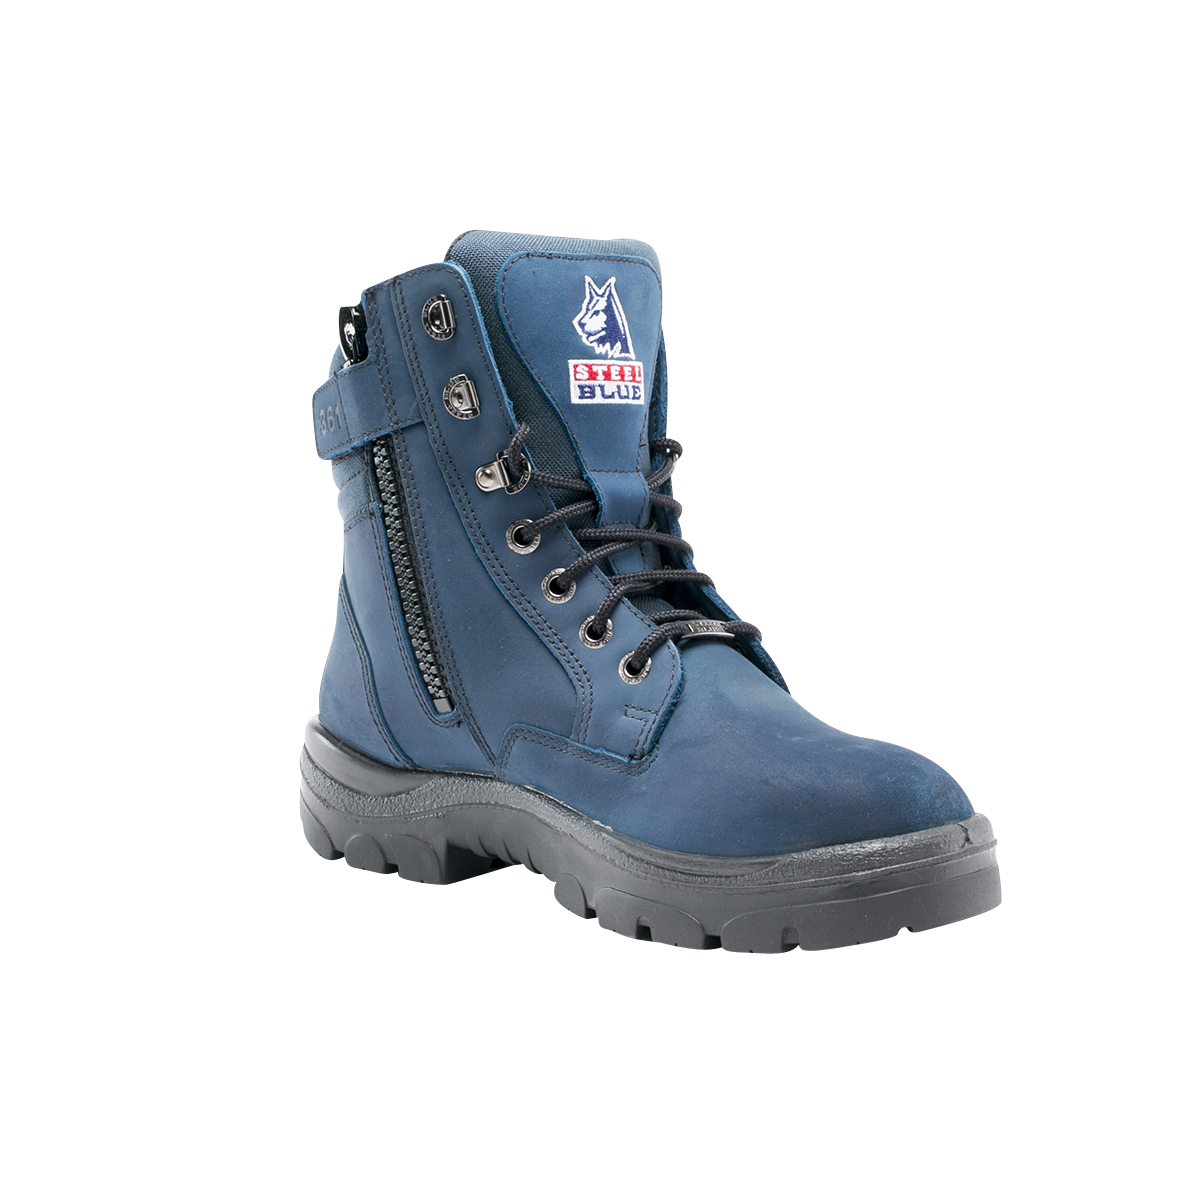 BOOT SOUTHERN CROSS ZIP BLUE 10 -ANKLE LACE UP BLUE TPU STEEL CAP